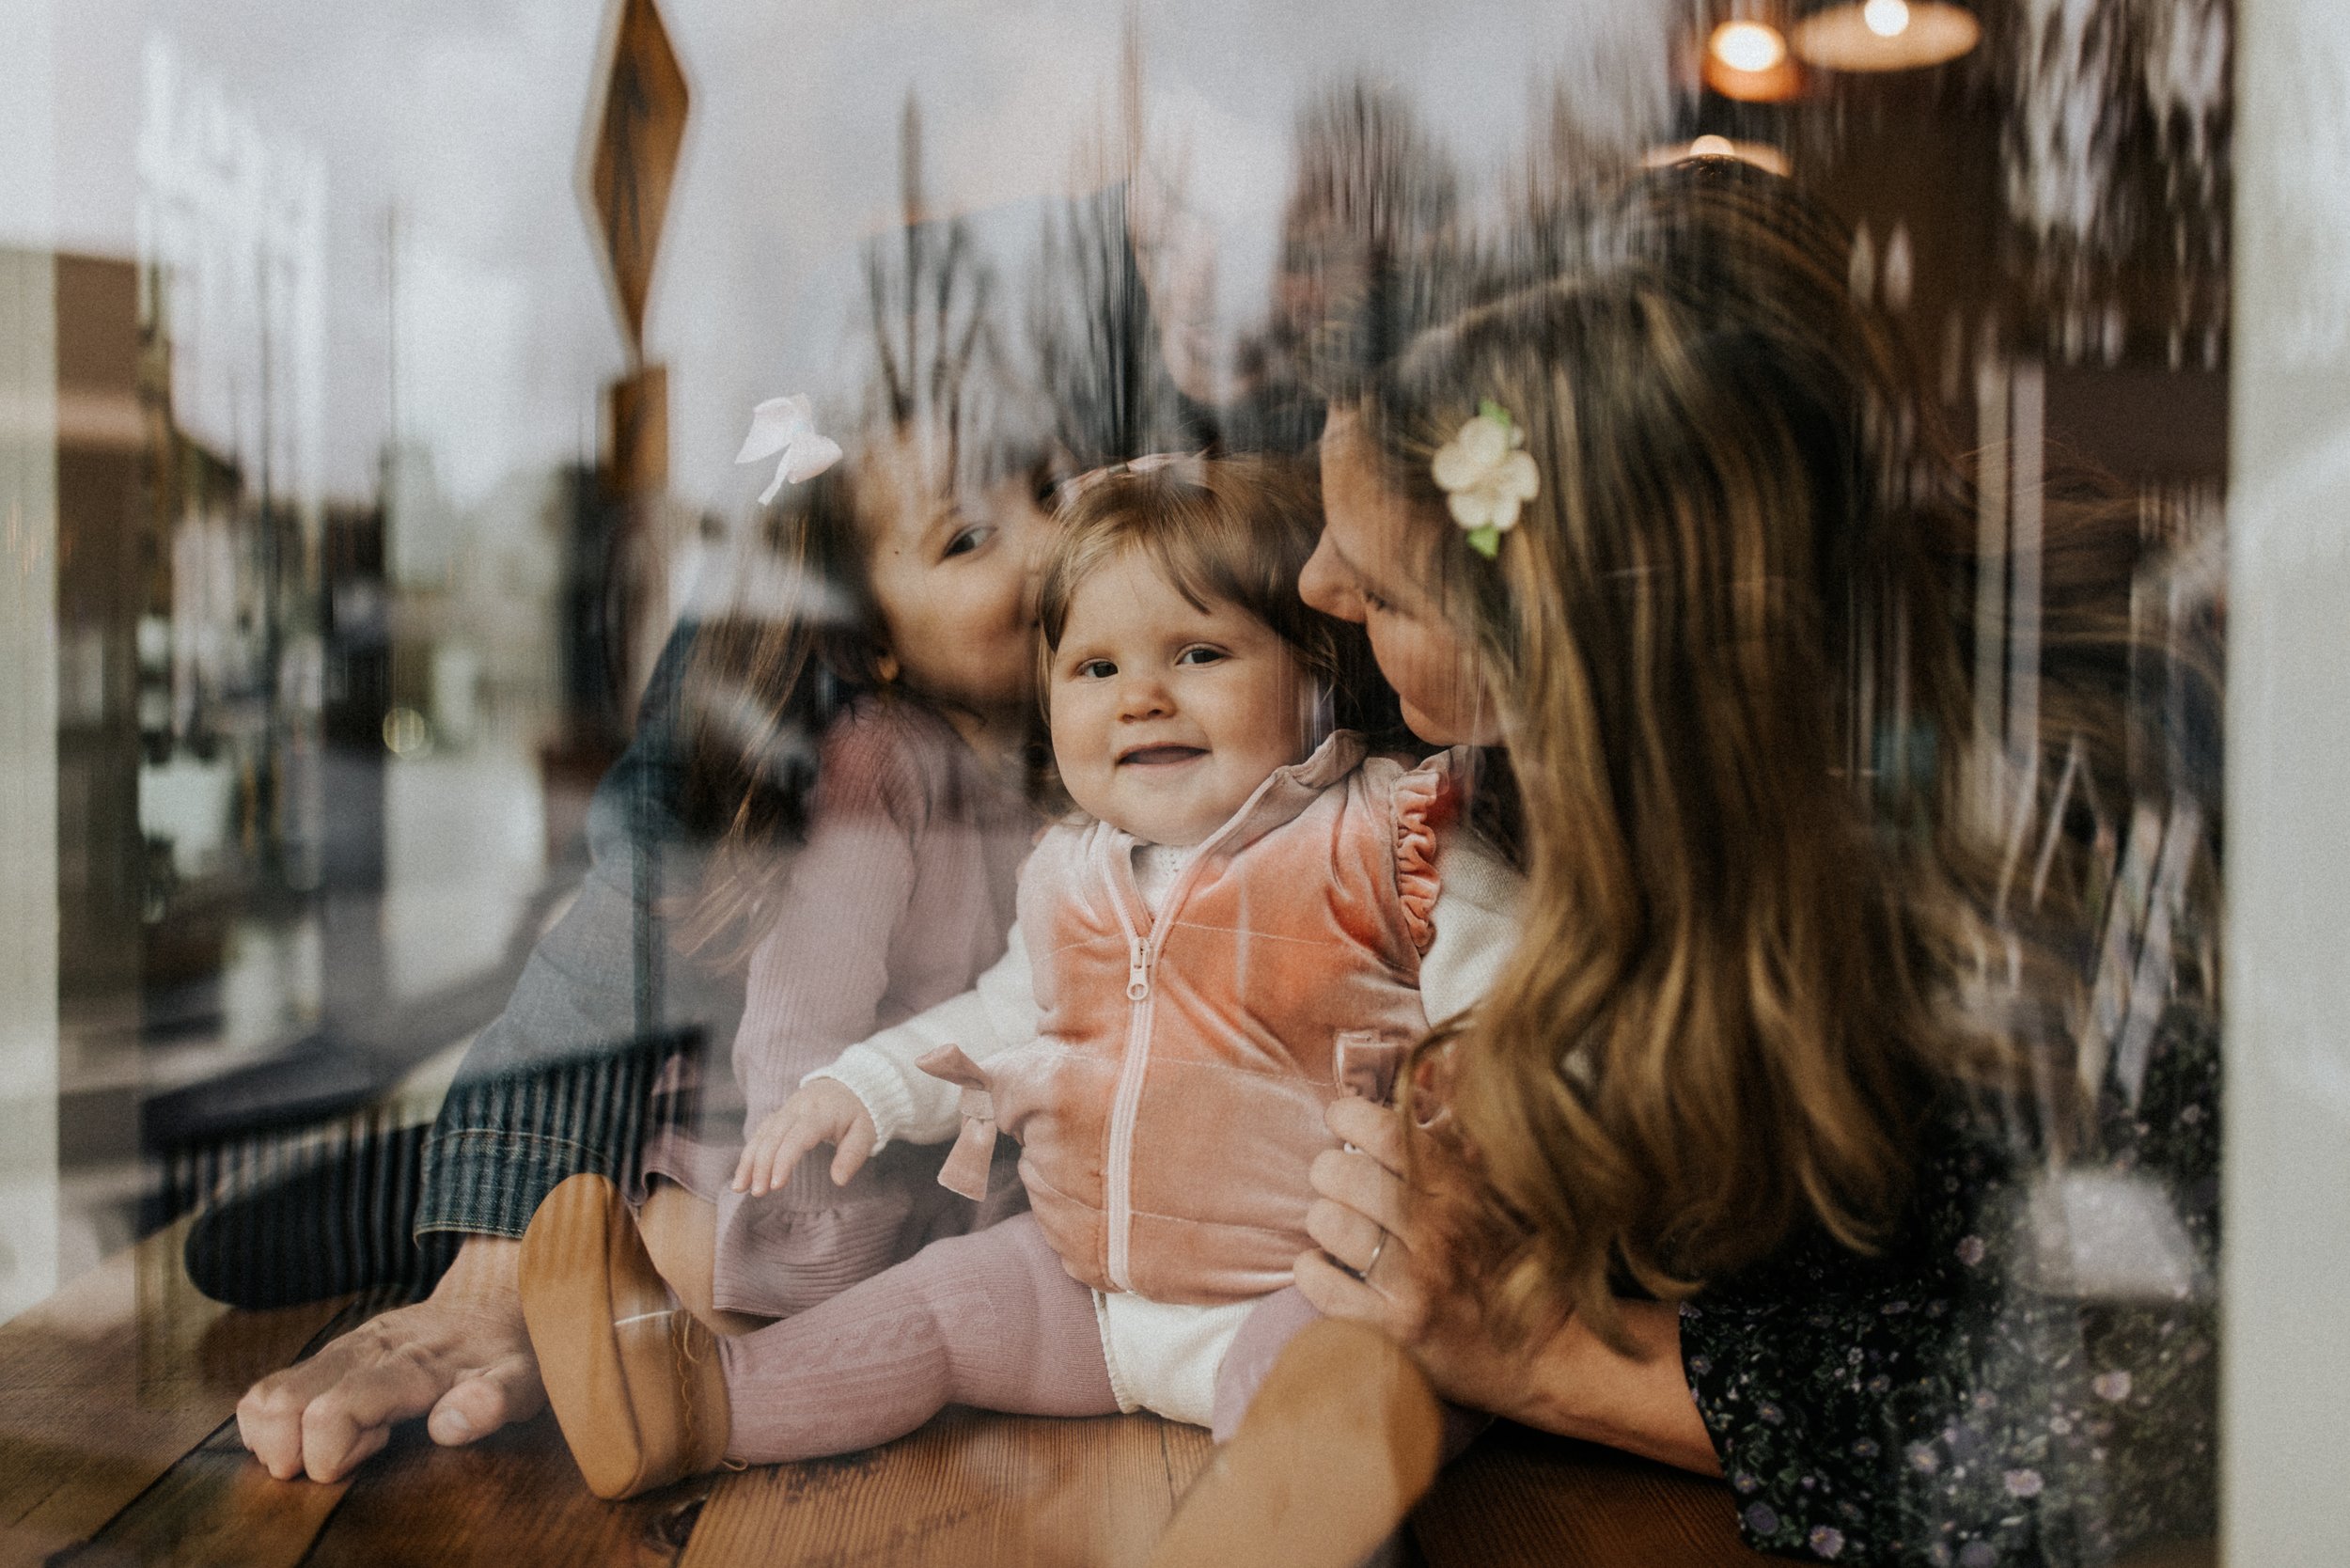 A mother and daughter are sitting in front of a window with a baby in their arms.